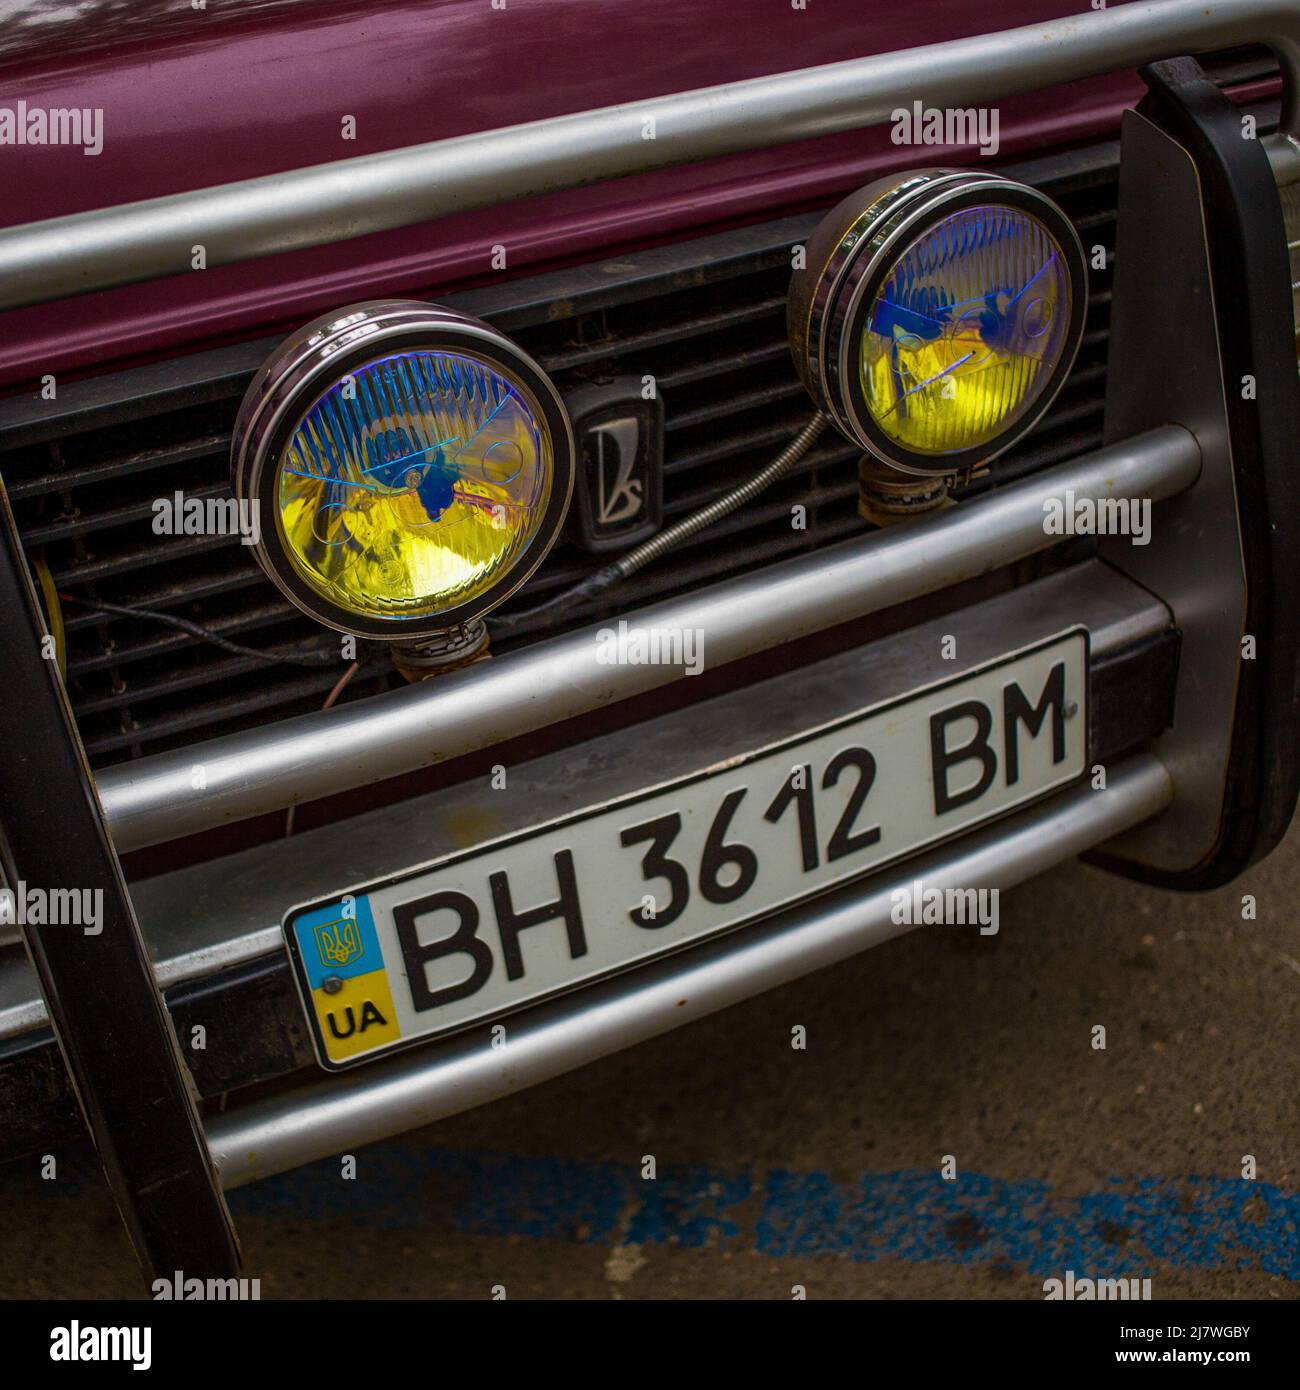 Michael Bunel / Le Pictorium -  The colors of Ukraine -  09/05/2014  -  Ukraine / Donbass / Odessa  -  The headlights of a car on a parking lot of Ode Stock Photo